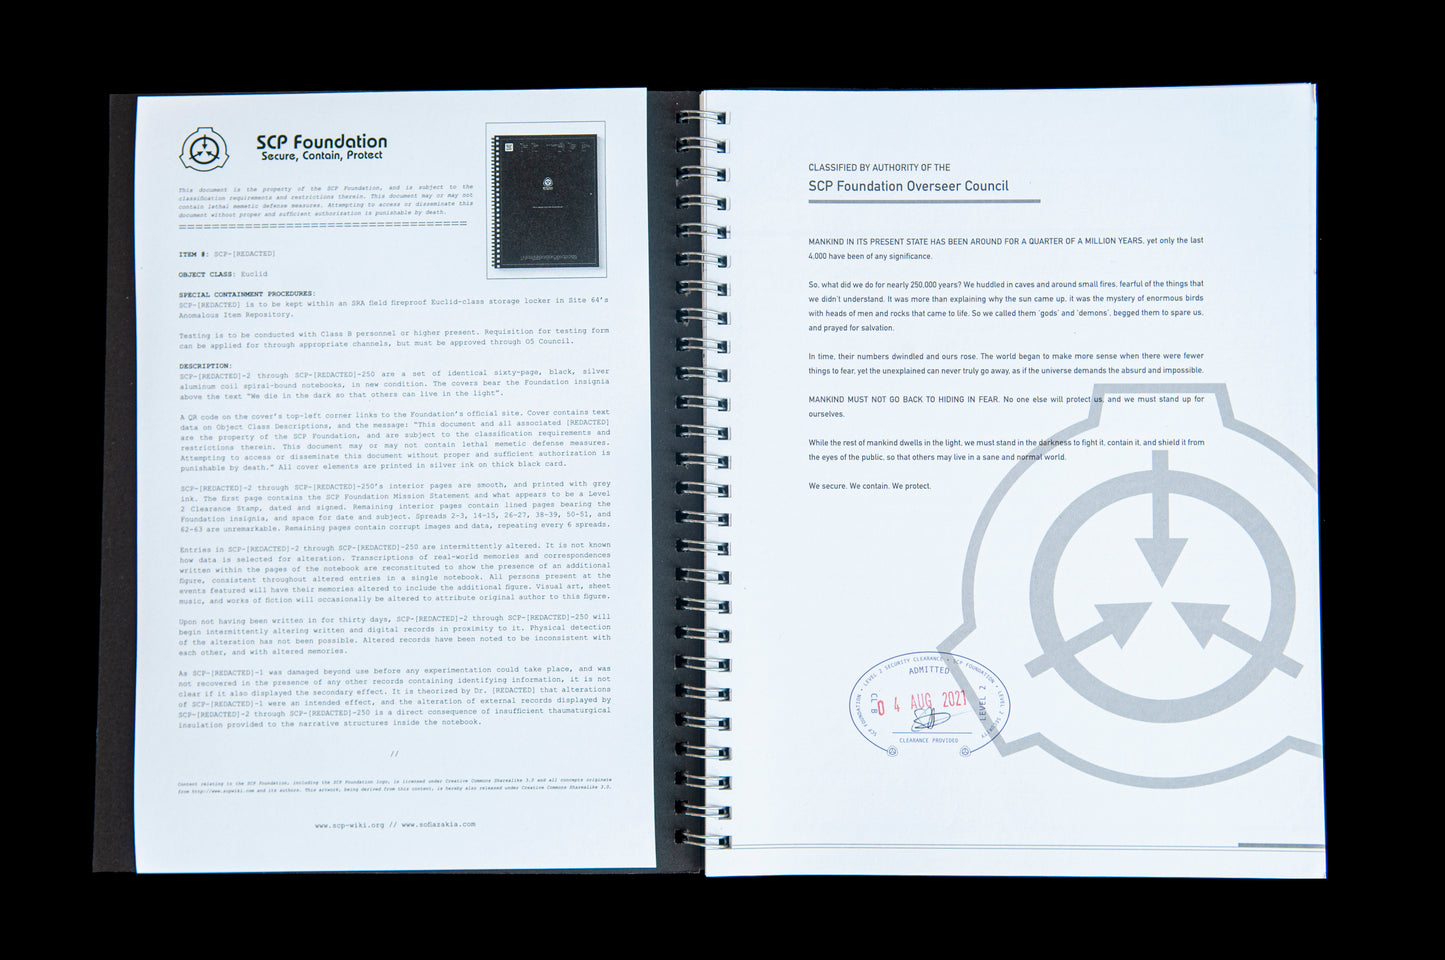 SCP Foundation - Site Director Notebook - by foundation, scp